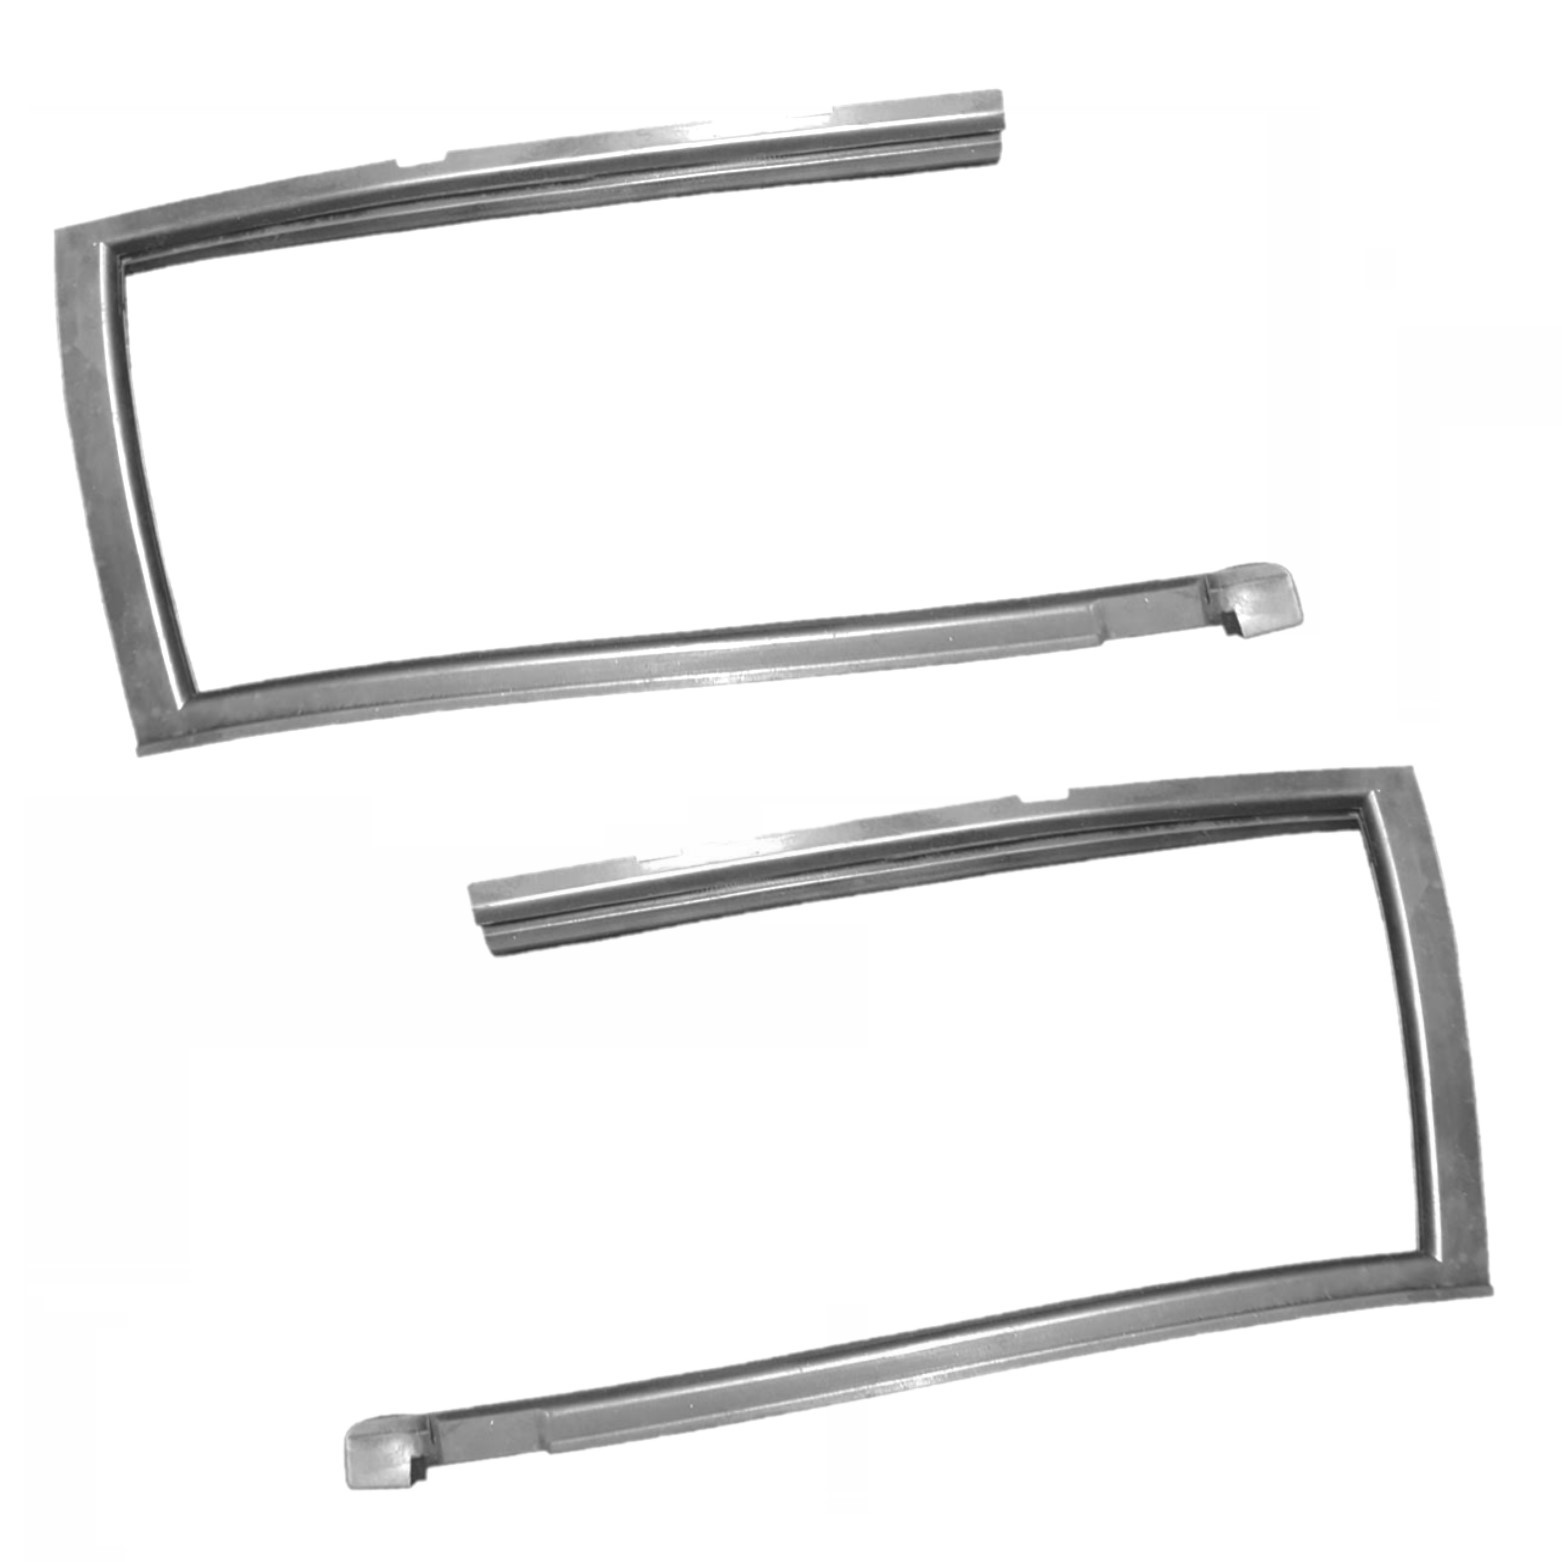 Reproduction Rear Quarter Glass Seal PAIR (Left & Right) : suit VH Charger FIXED GLASS